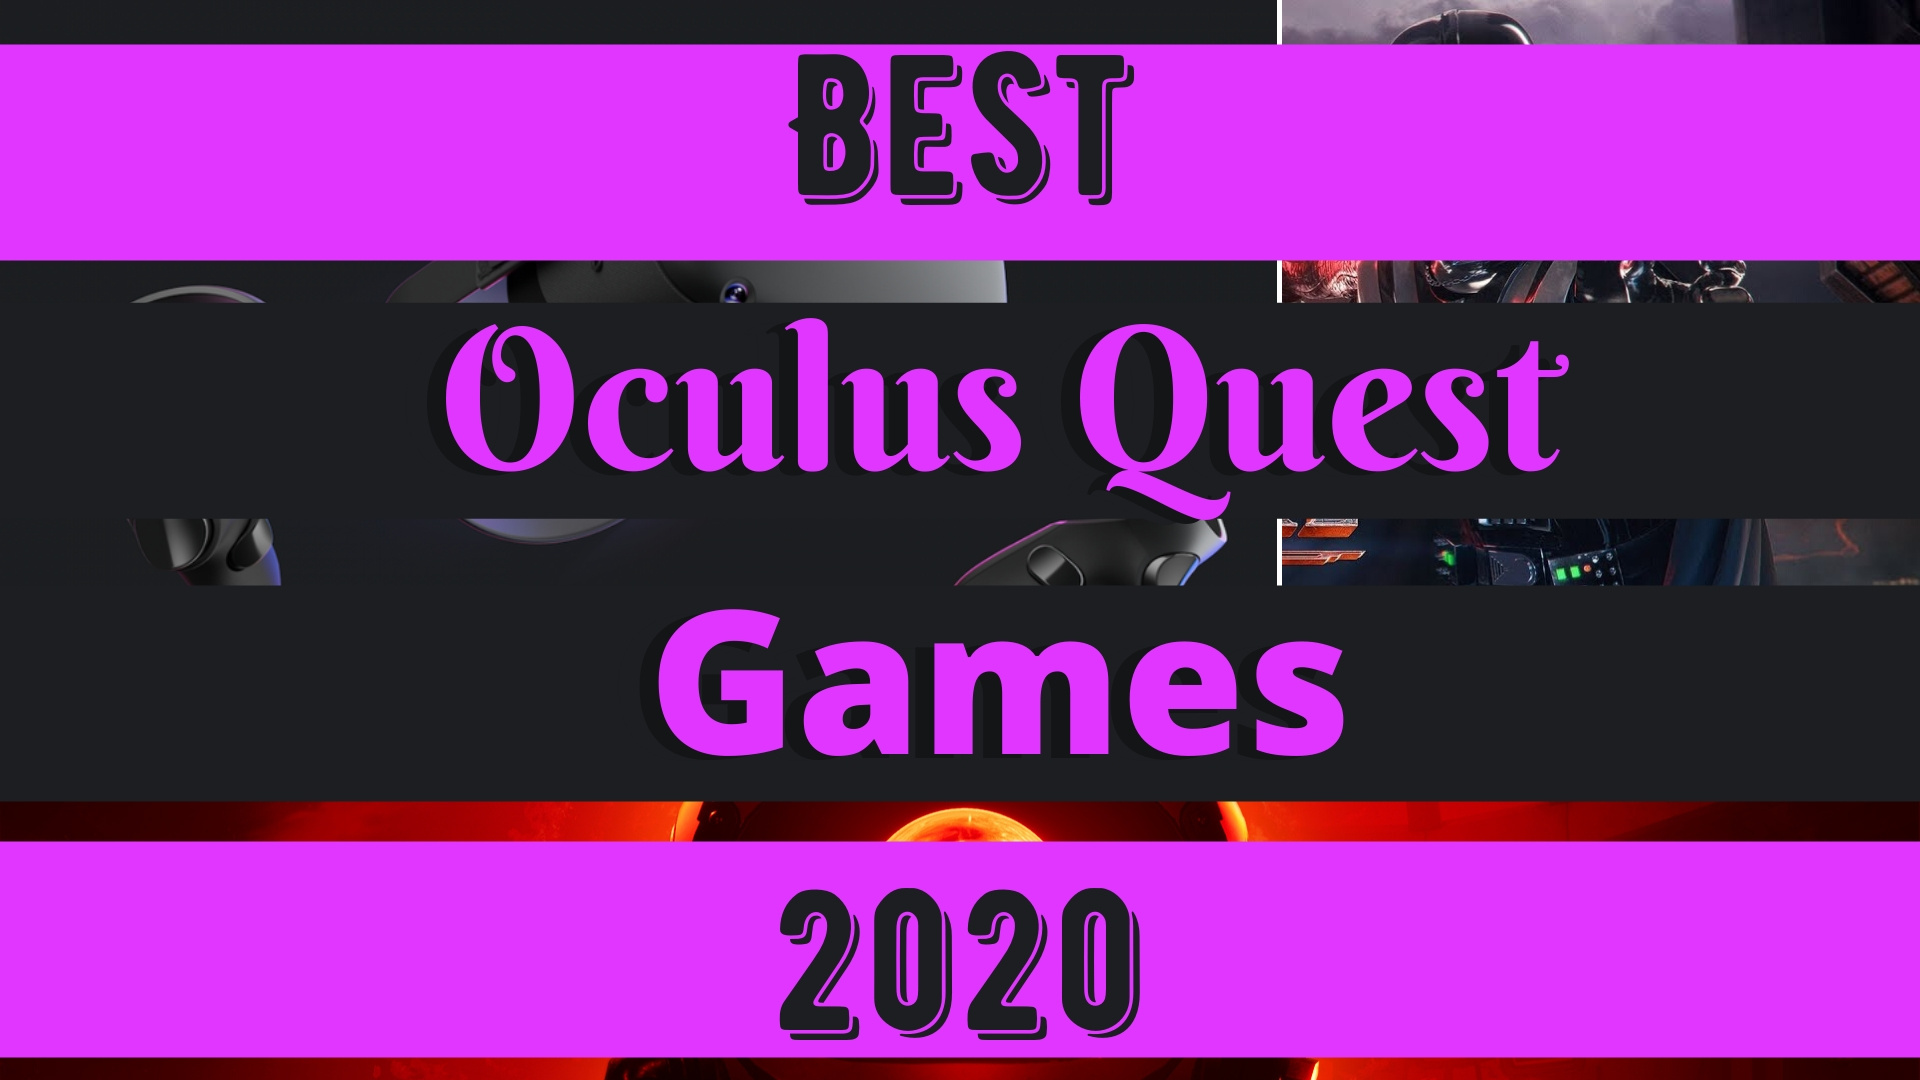 Oculus Quest Games Coupon Codes - wide 2